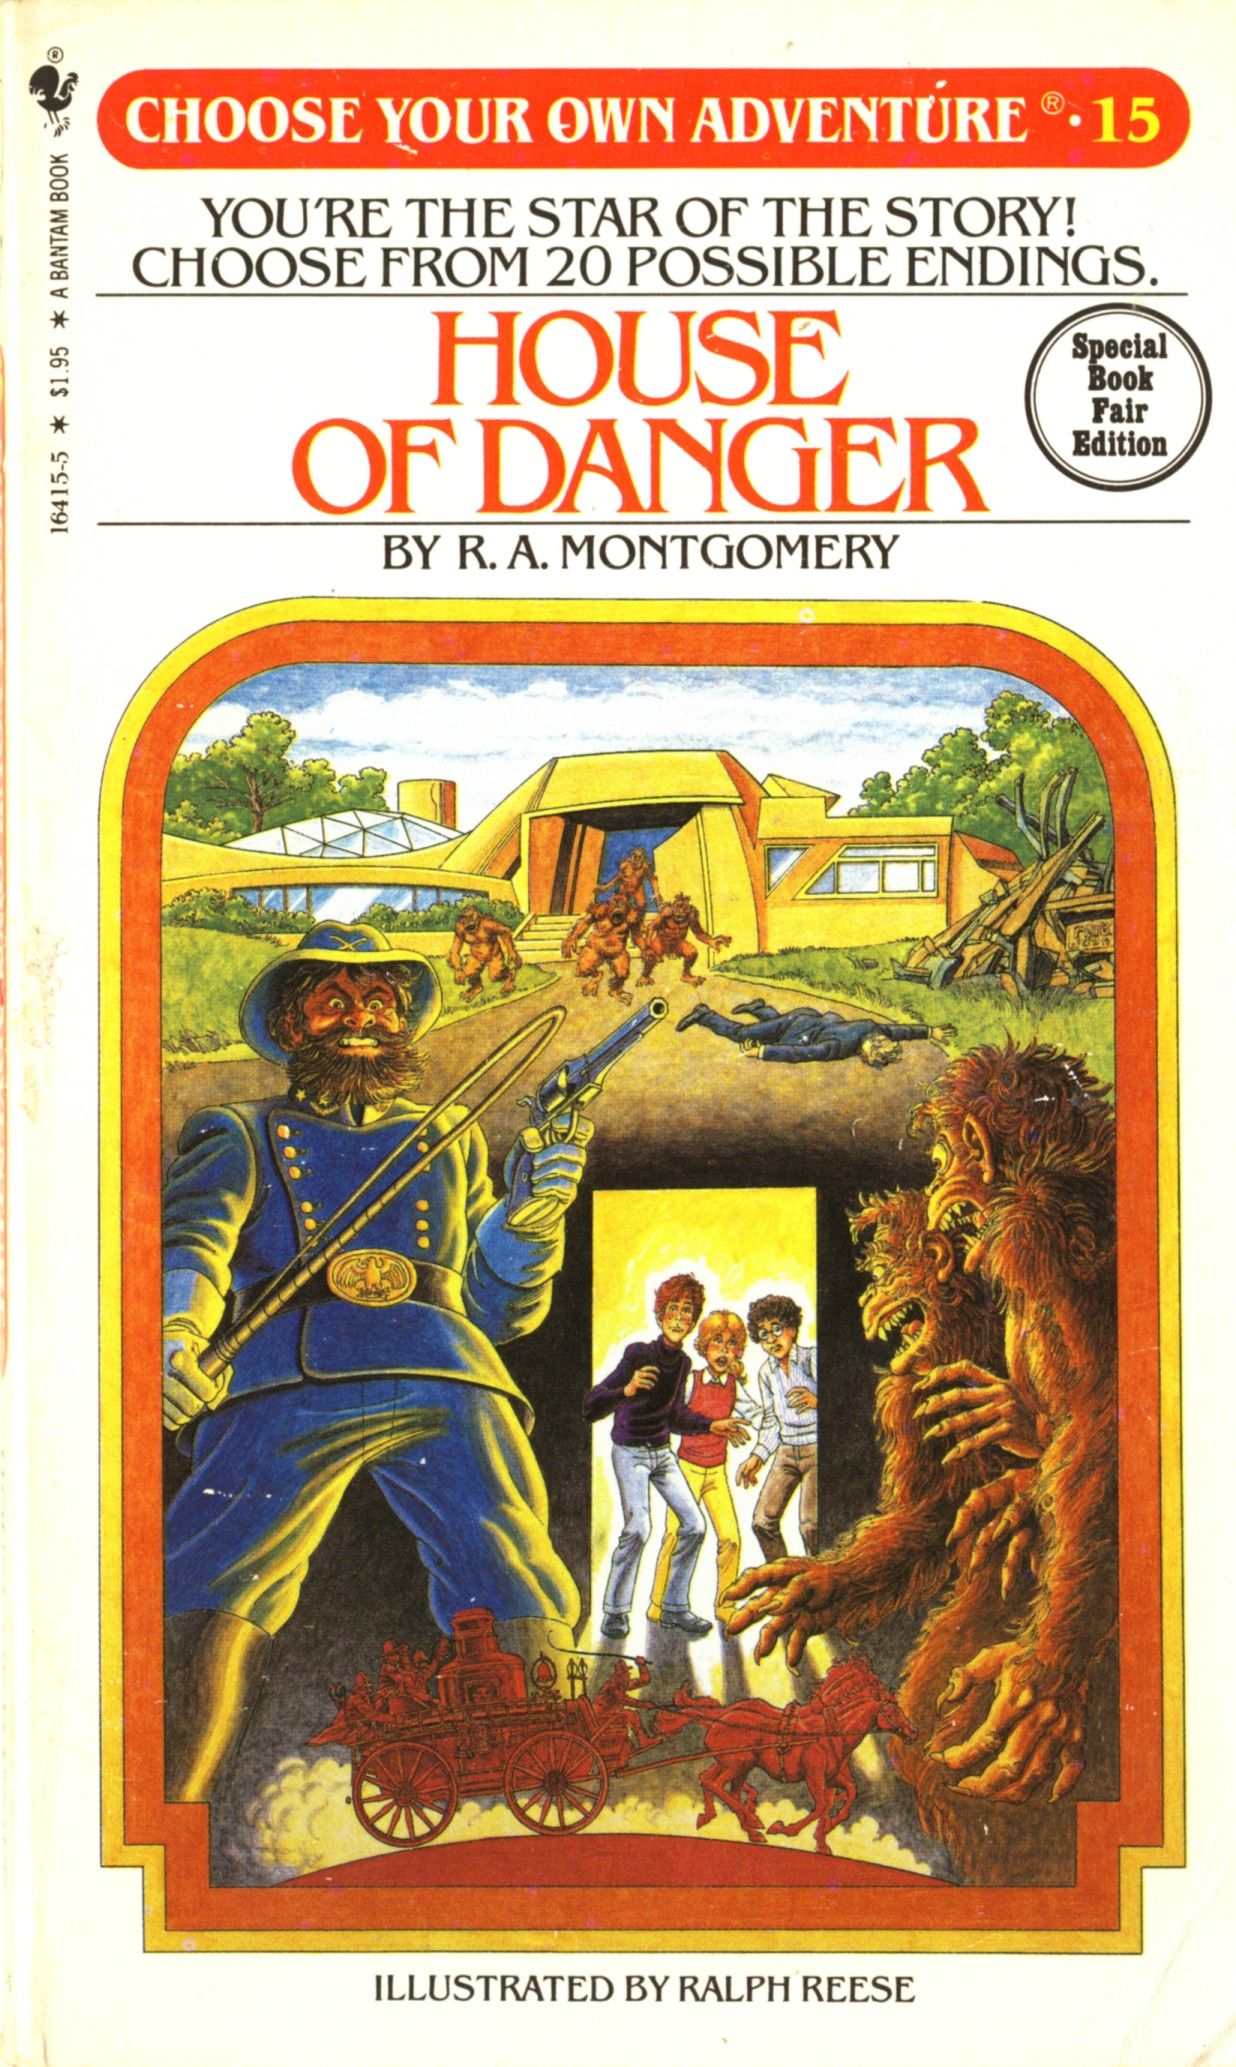 Choose Your Own Adventure - House of Danger (book)